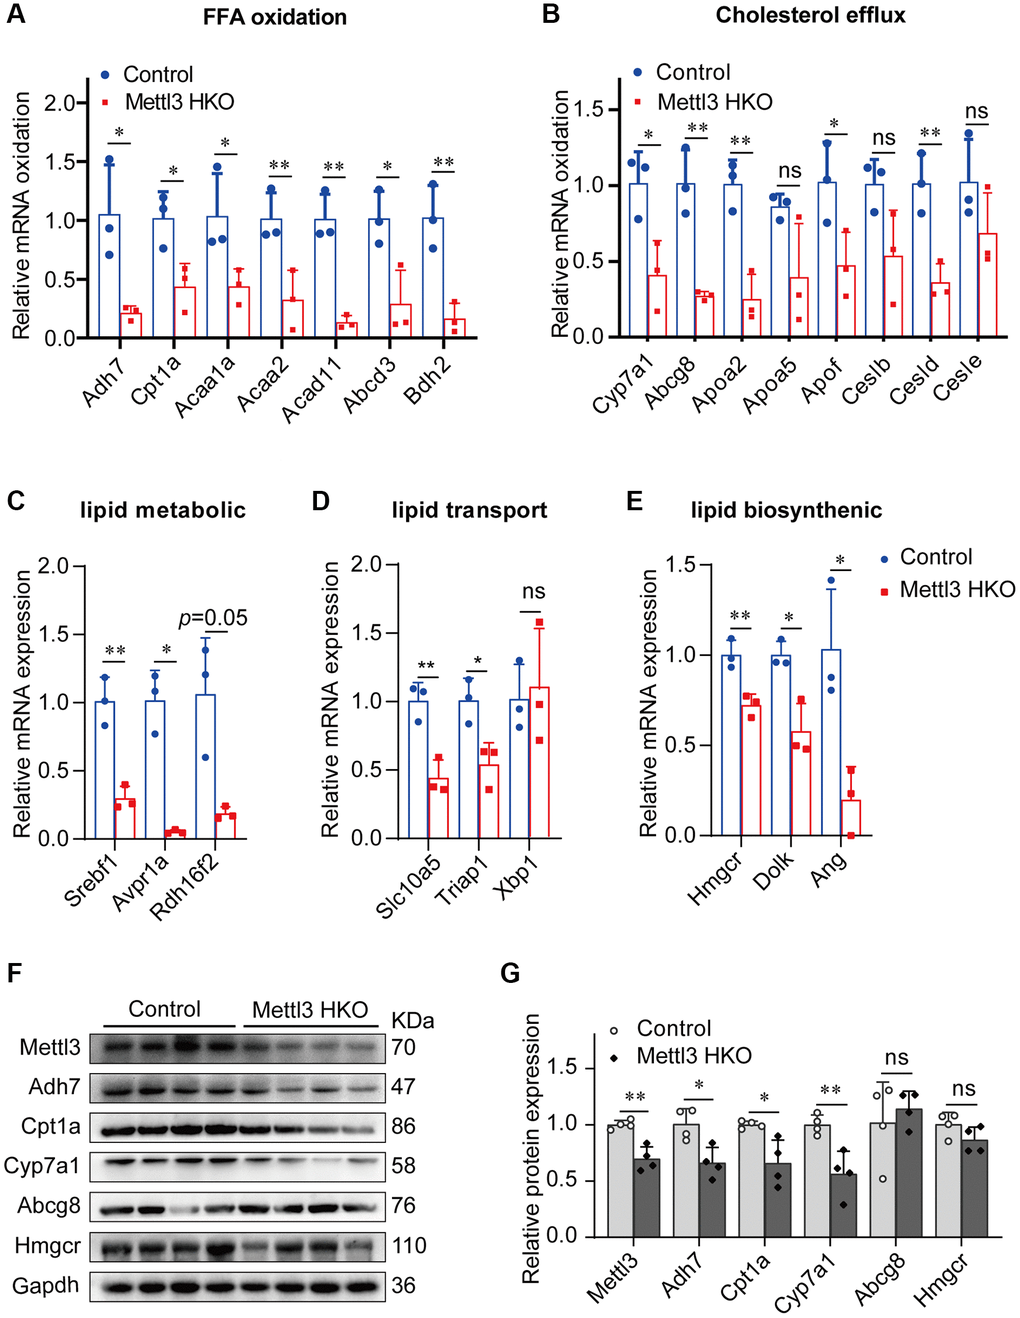 Genes related to lipid metabolism are significantly downregulated in the liver of METTL3 HKO mice. (A–E) qRT-PCR analysis of the mRNA expression of genes related to fatty acid oxidation (A), cholesterol efflux (B), lipid metabolic process (C), lipid transport (D), and lipid biosynthetic process (E) in the liver of METTL3 HKO mice and control mice. (F–G) Representative immunoblotting images (F) and quantitative results (G) for the potential target gene in the liver of METTL3 HKO mice and control mice. Data are presented as the mean ± SD. Abbreviations: FFA: free fatty acid; ns: not significant; *P **P 